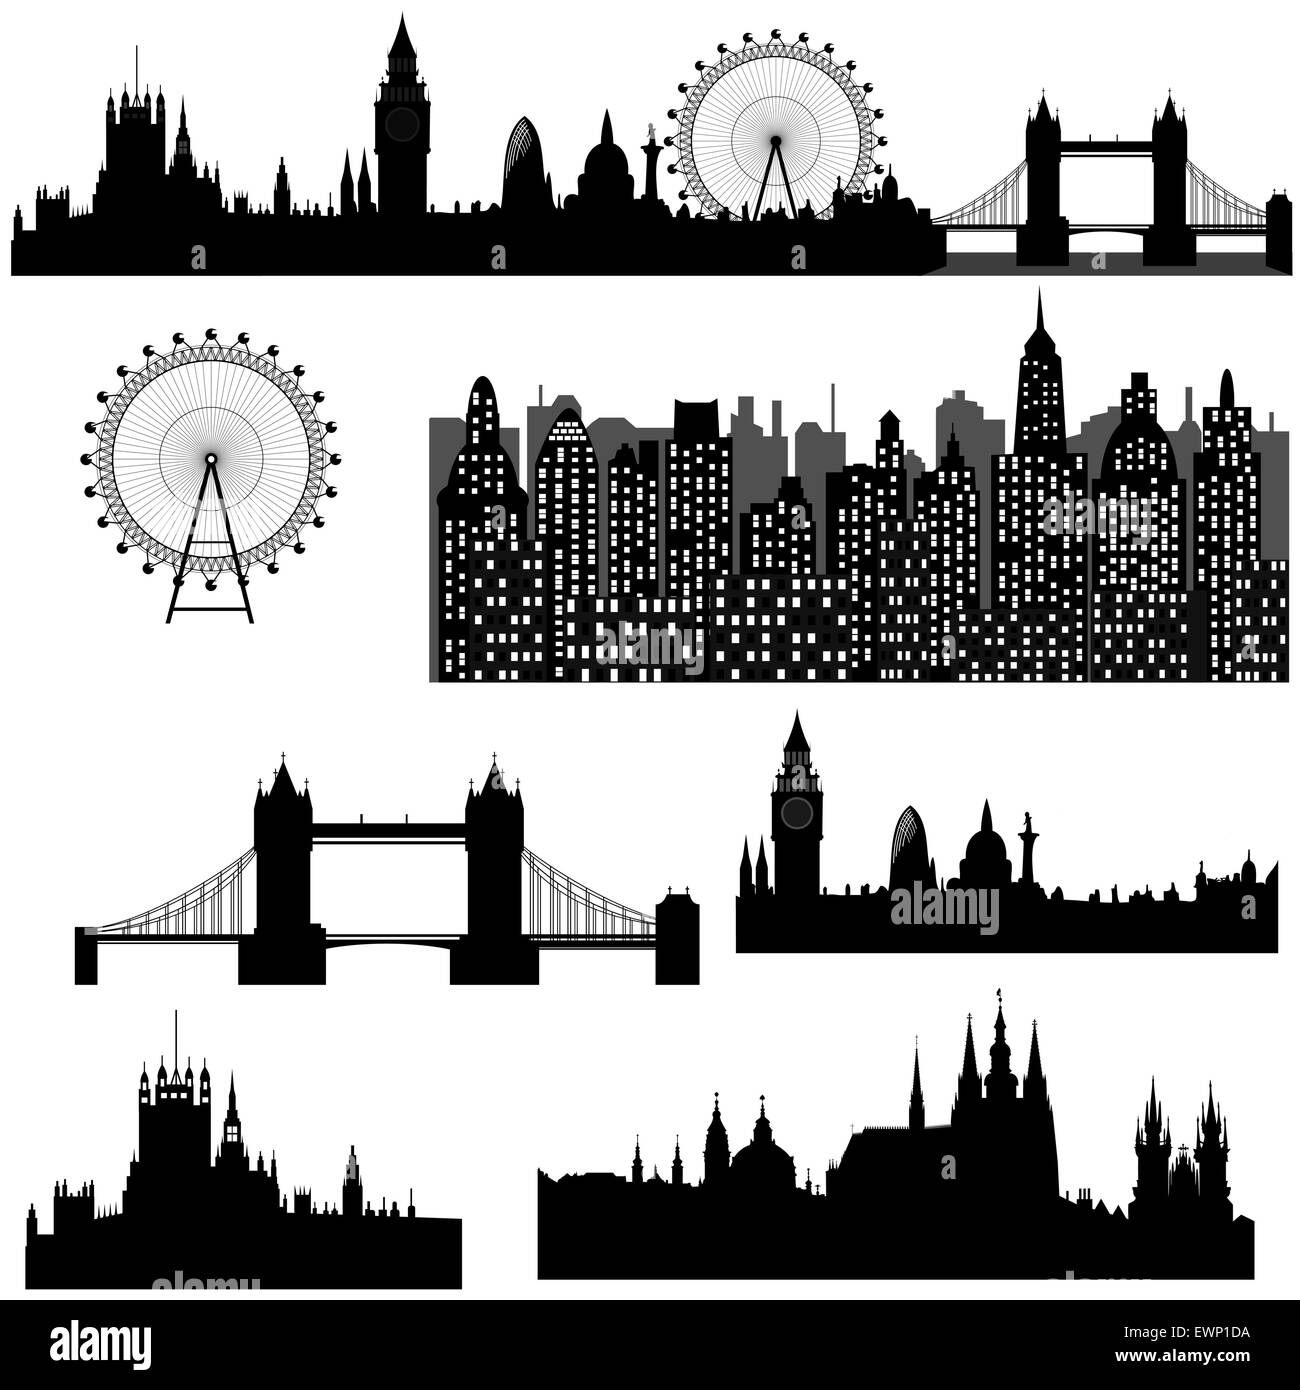 Famous architectural monuments and landmarks - London, Prague and modern city - vector Stock Vector